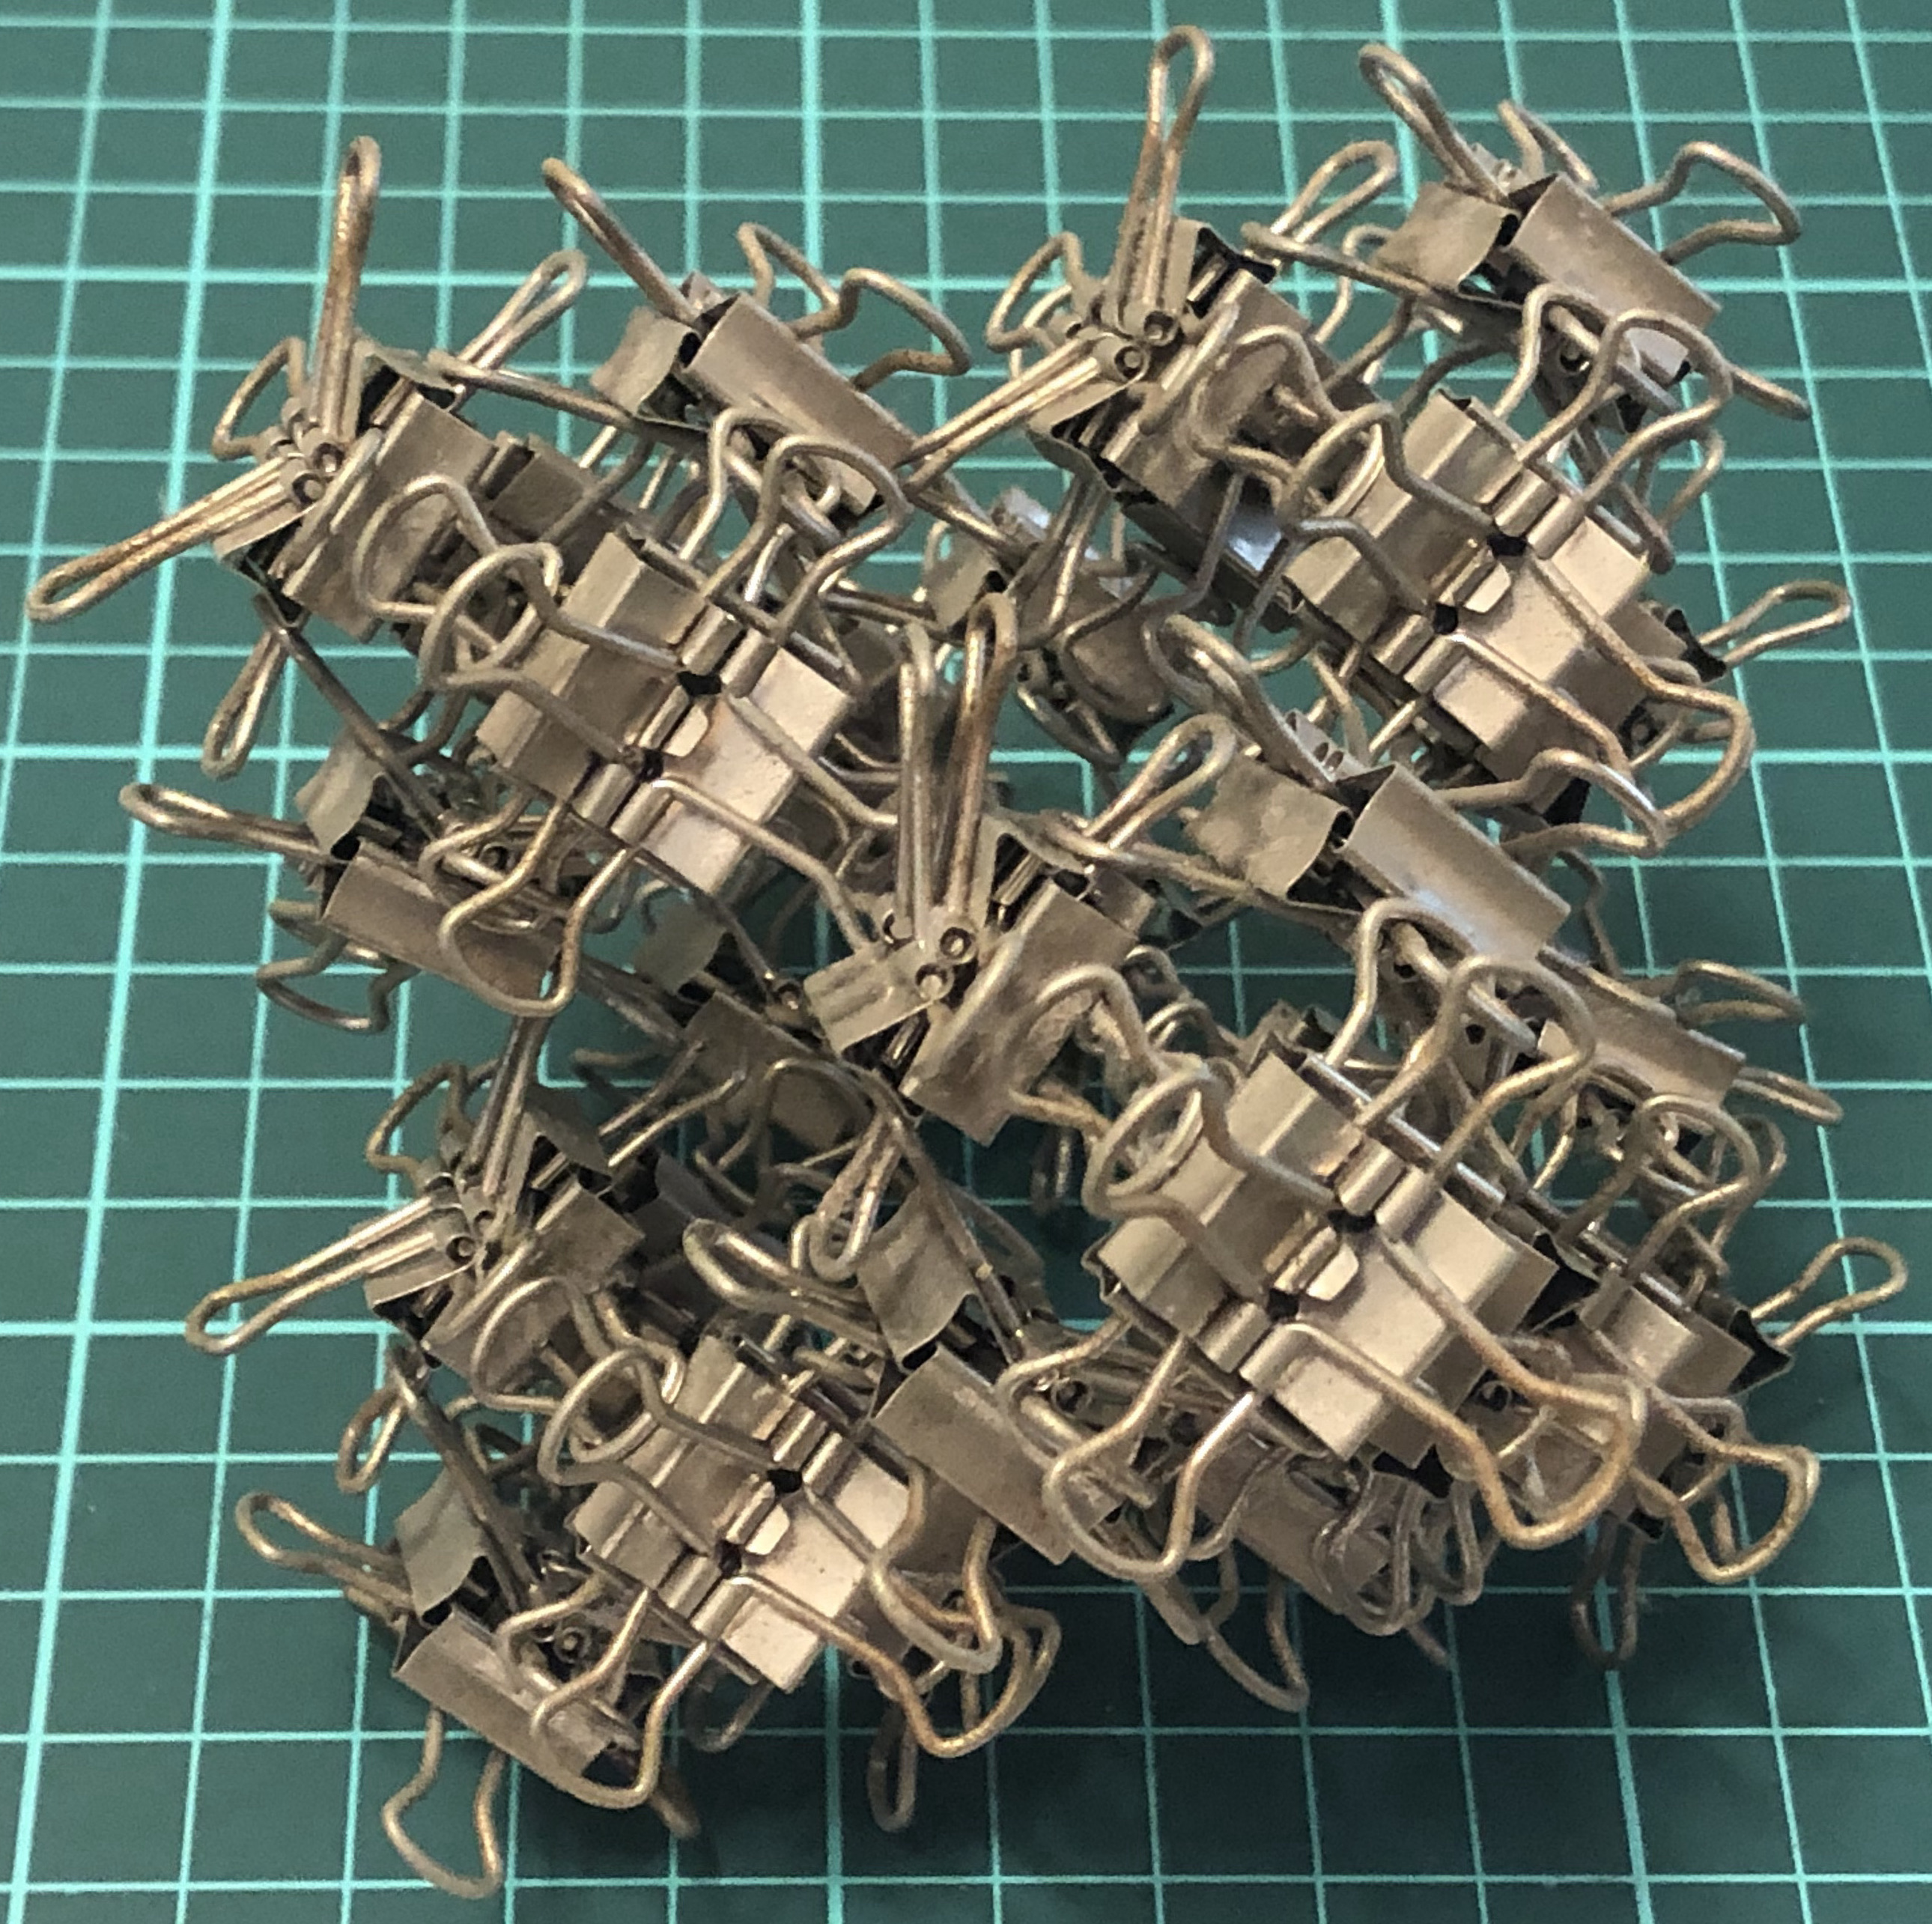 24 clips forming 12 Η-faces forming lofted cube